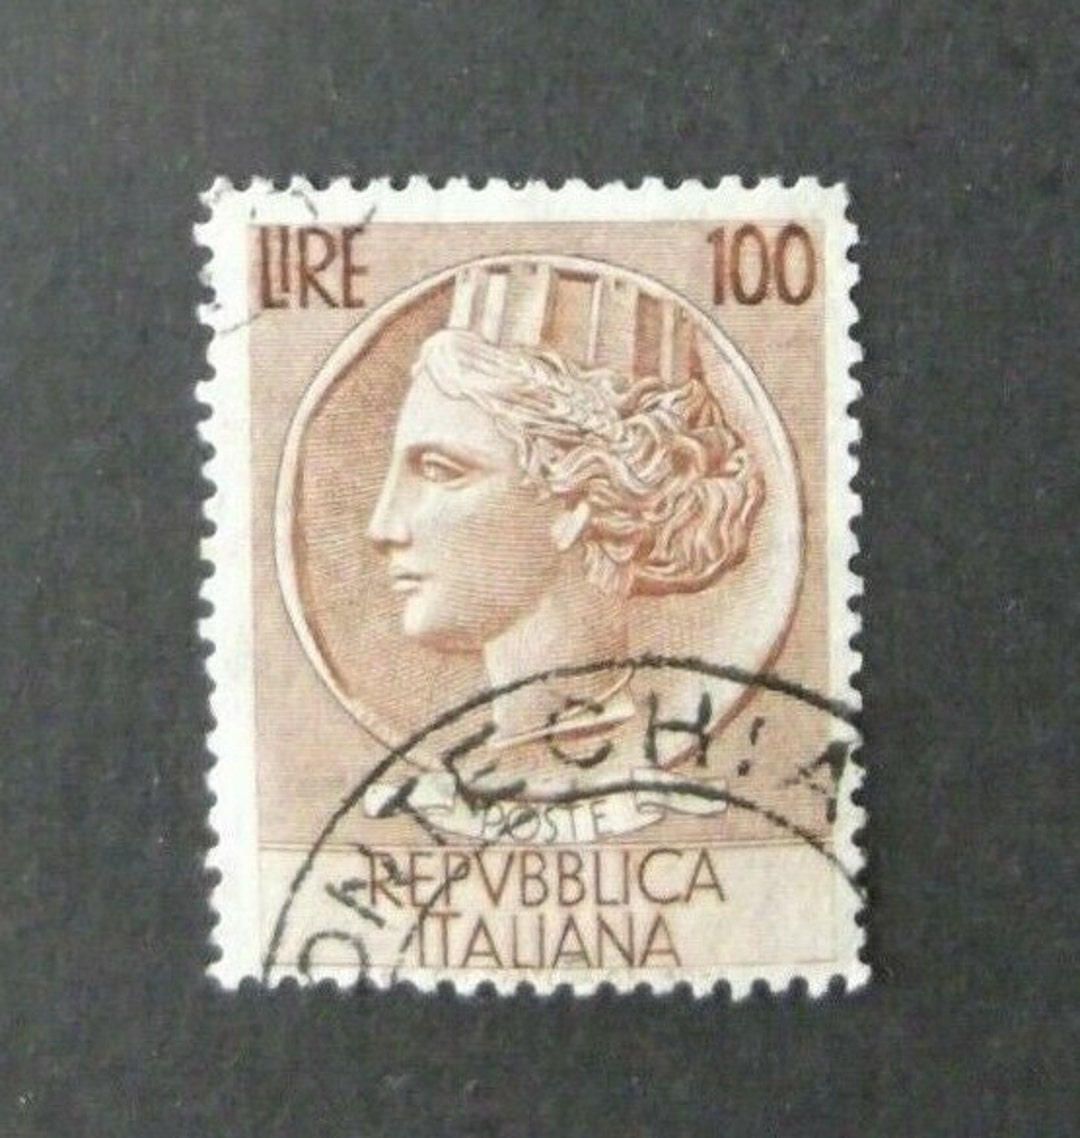 Vintage Stamps: Italy 2 Strips Small 100 Lire & 200 Lire Europe Italiana  Postage